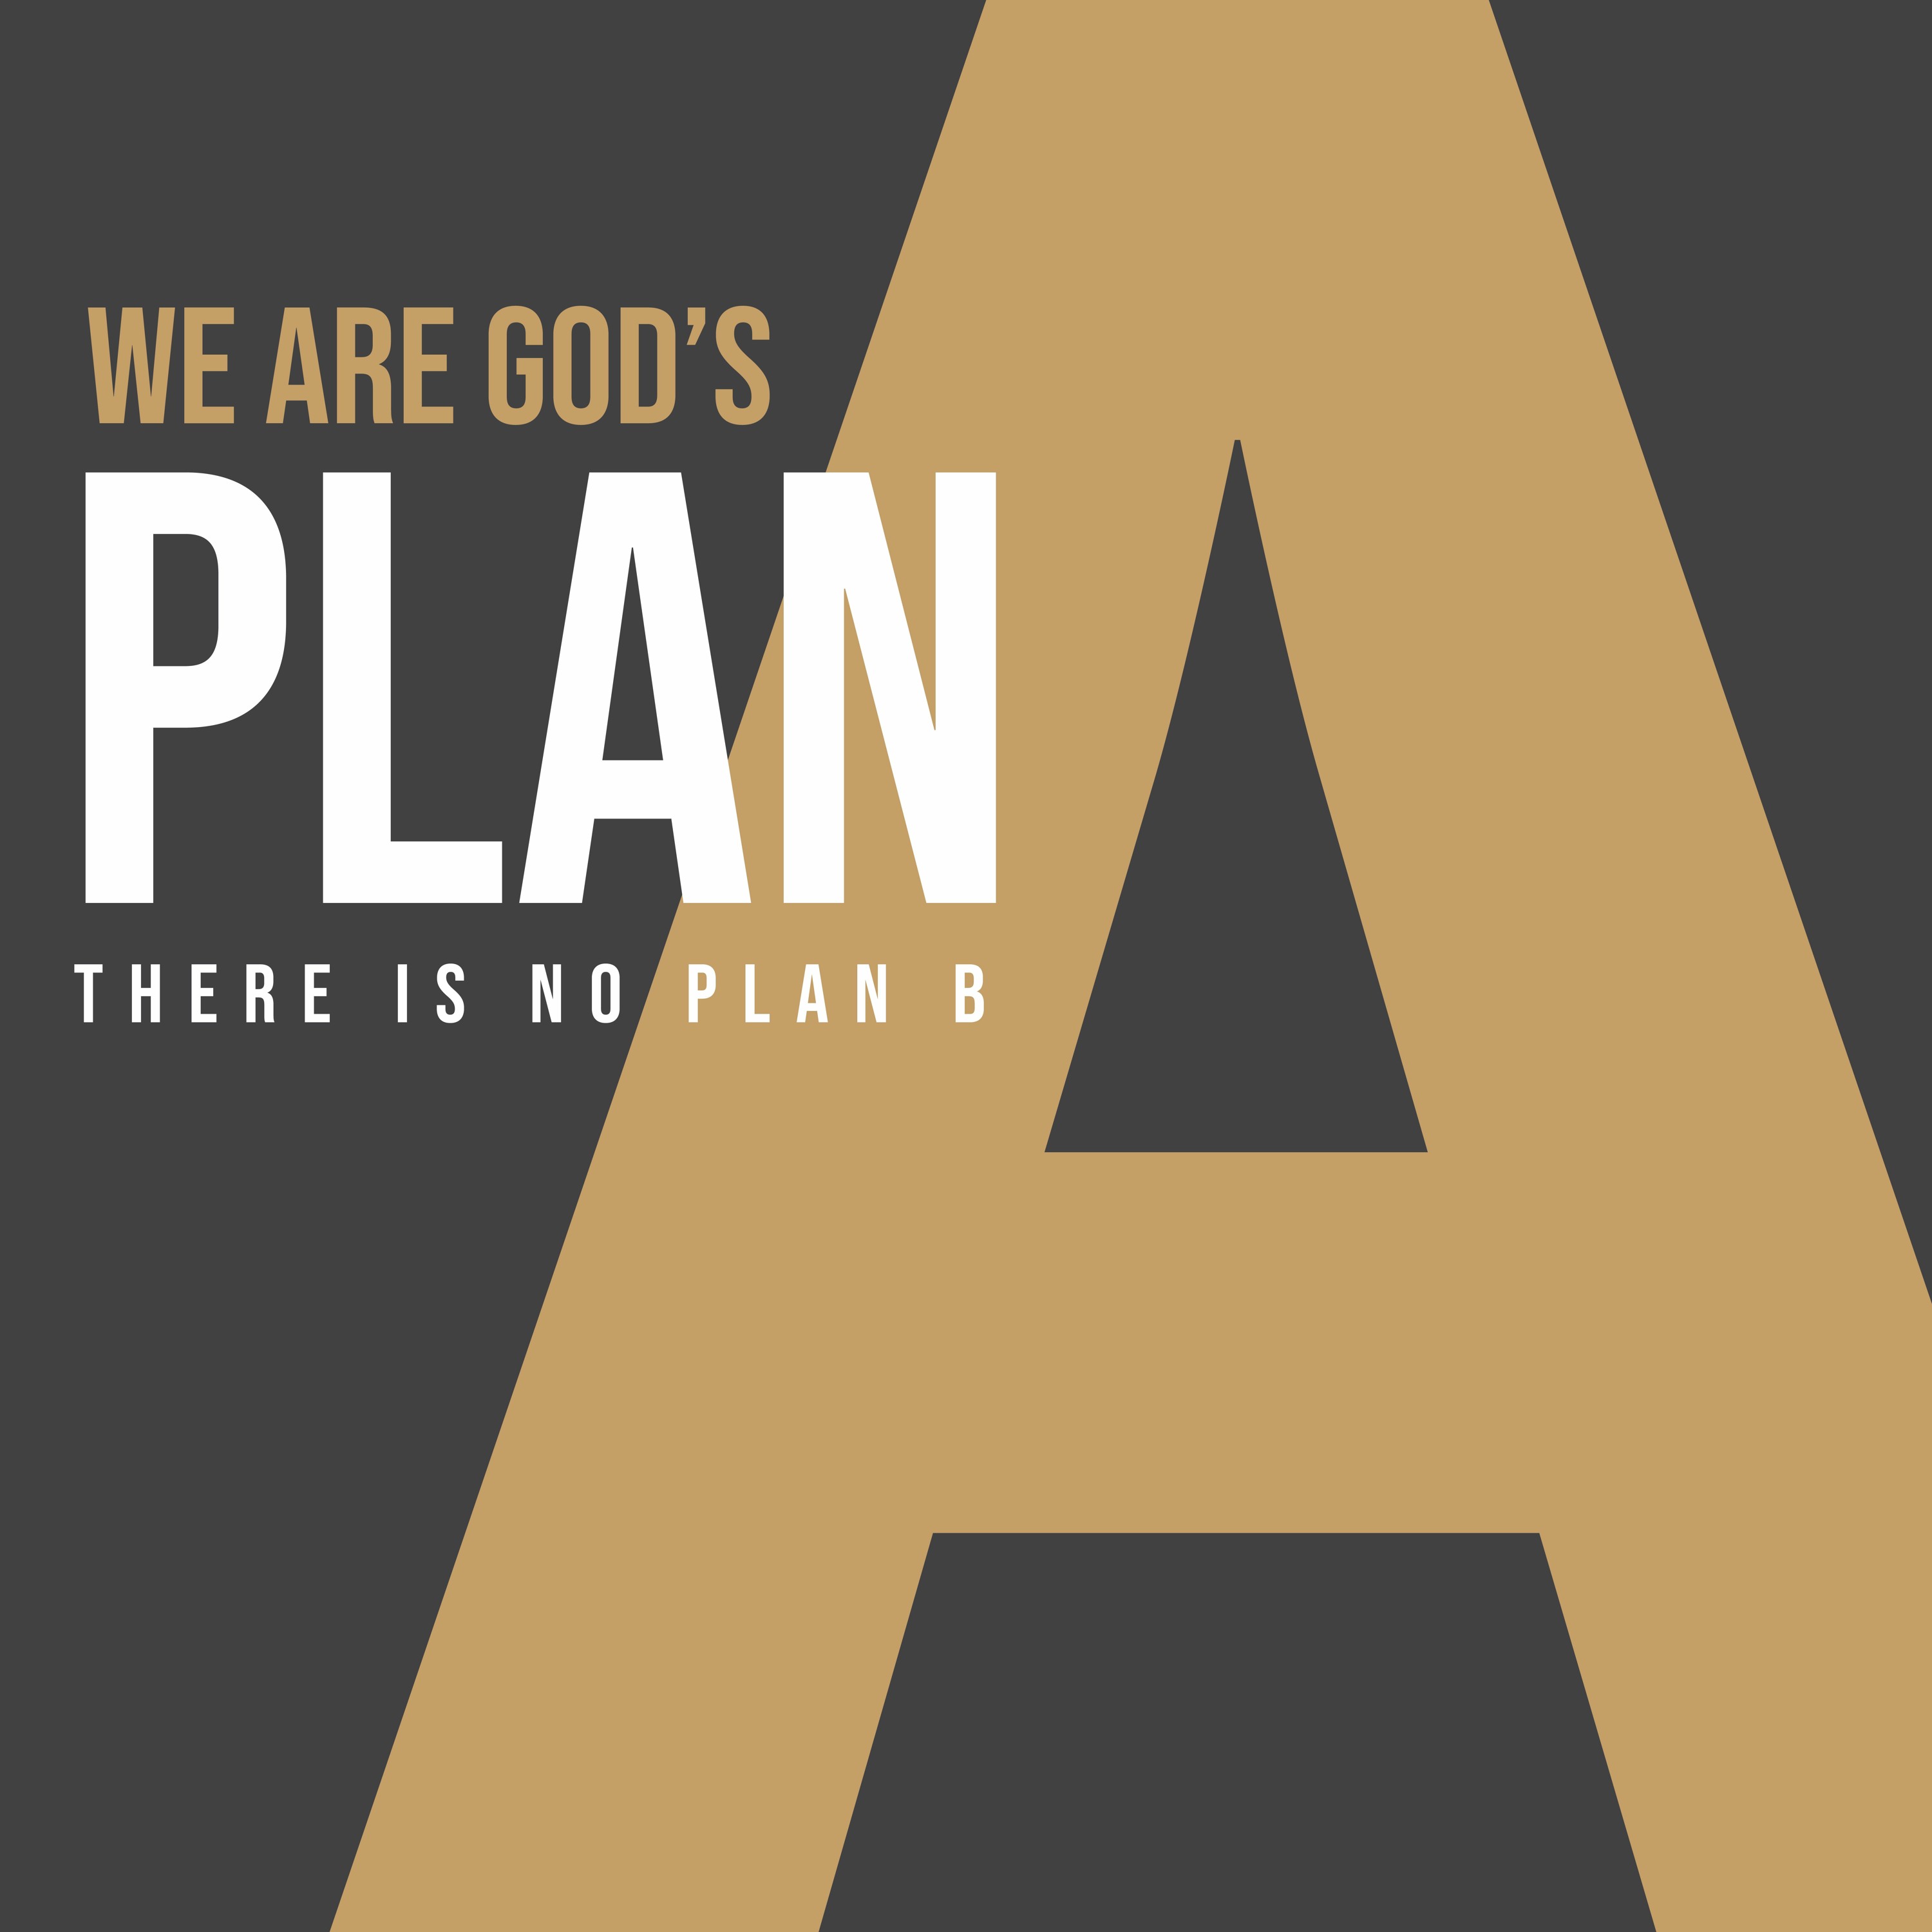 God’s Plan A For Evangelism | We Are God’s Plan A | Ethan Magness